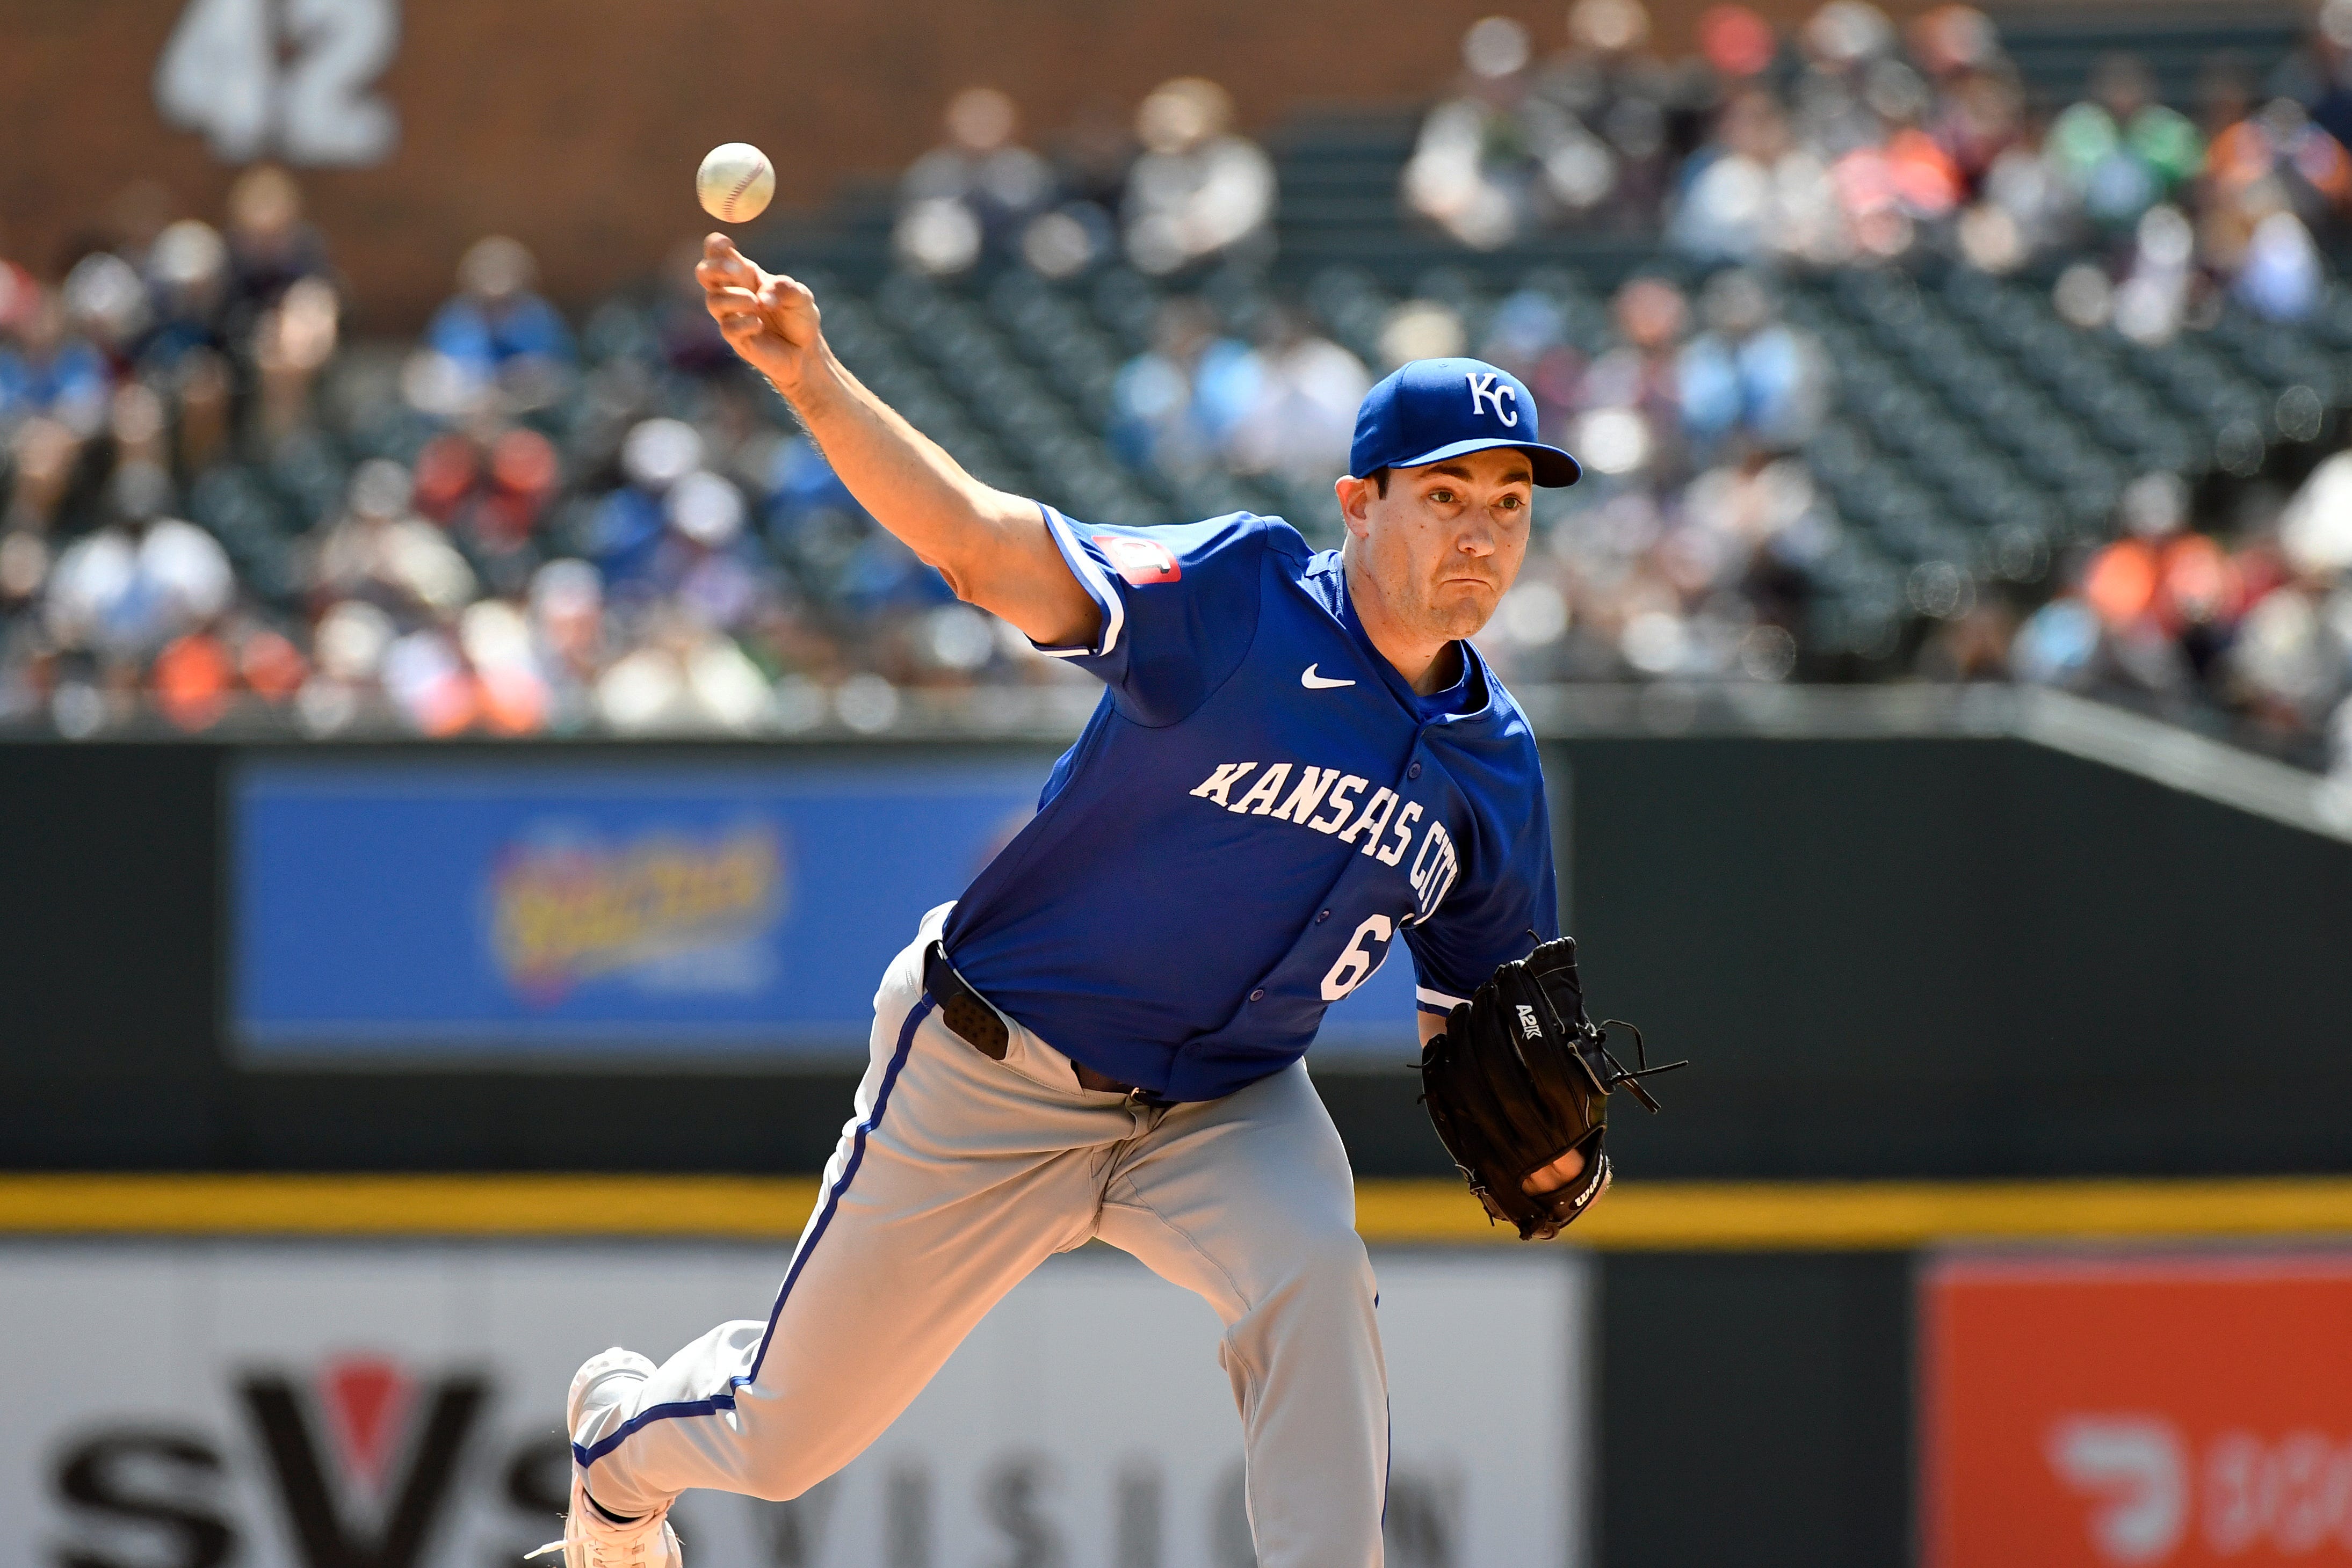 Royals starting pitcher Seth Lugo throws against the Tigers in the first inning.